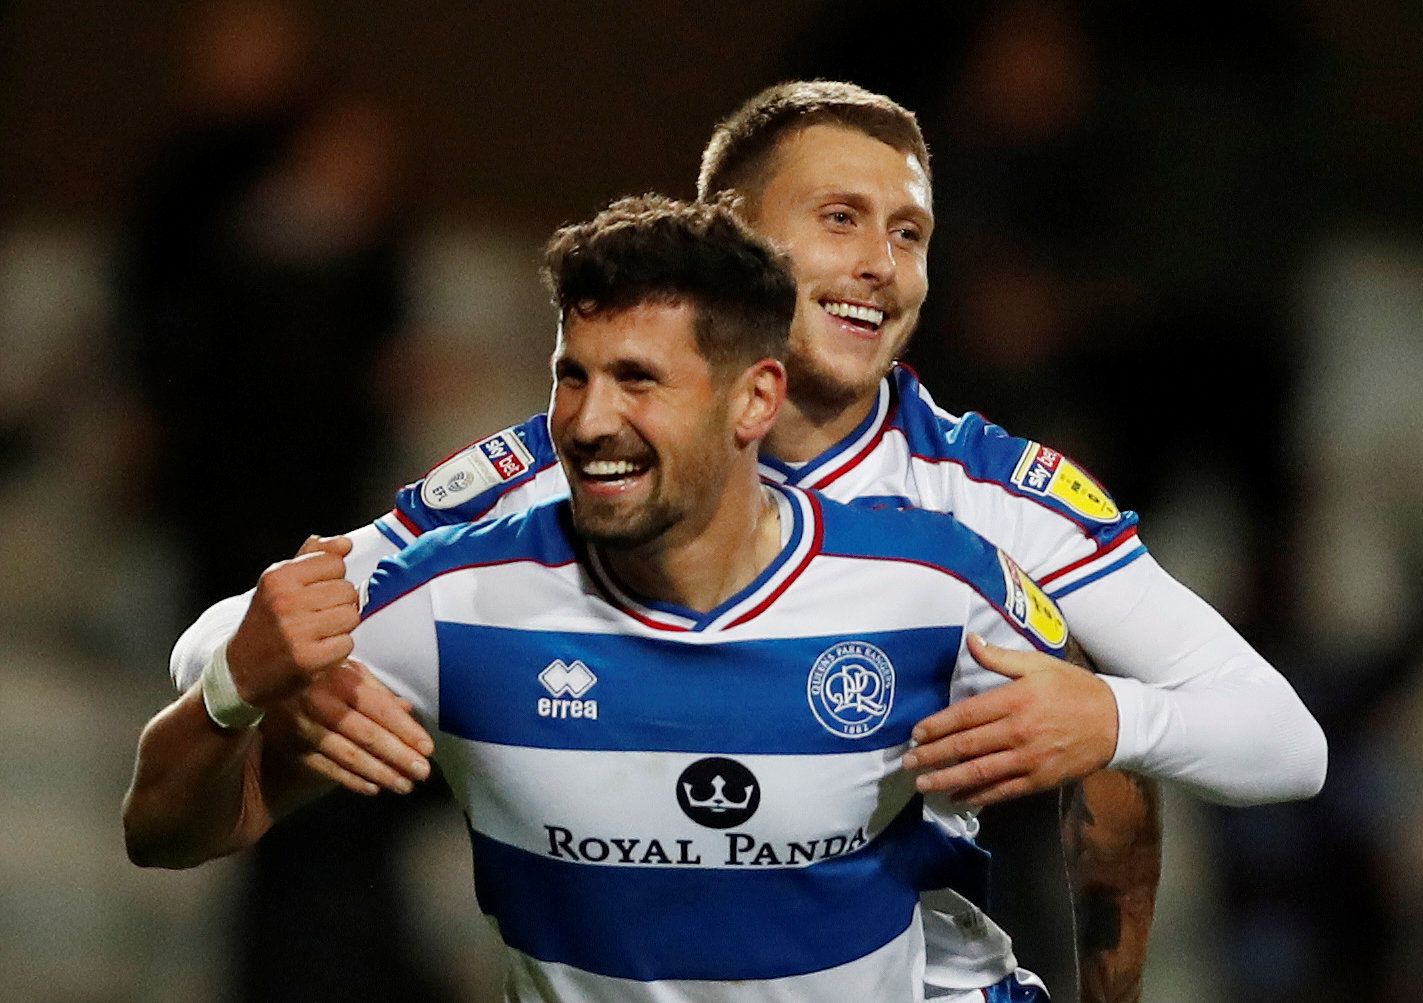 Soccer Football - Championship - Queens Park Rangers v Aston Villa - Loftus Road, London, Britain - October 26, 2018   QPR's Pawel Wszolek and Luke Freeman celebrate at full time   Action Images/Paul Childs    EDITORIAL USE ONLY. No use with unauthorized audio, video, data, fixture lists, club/league logos or 